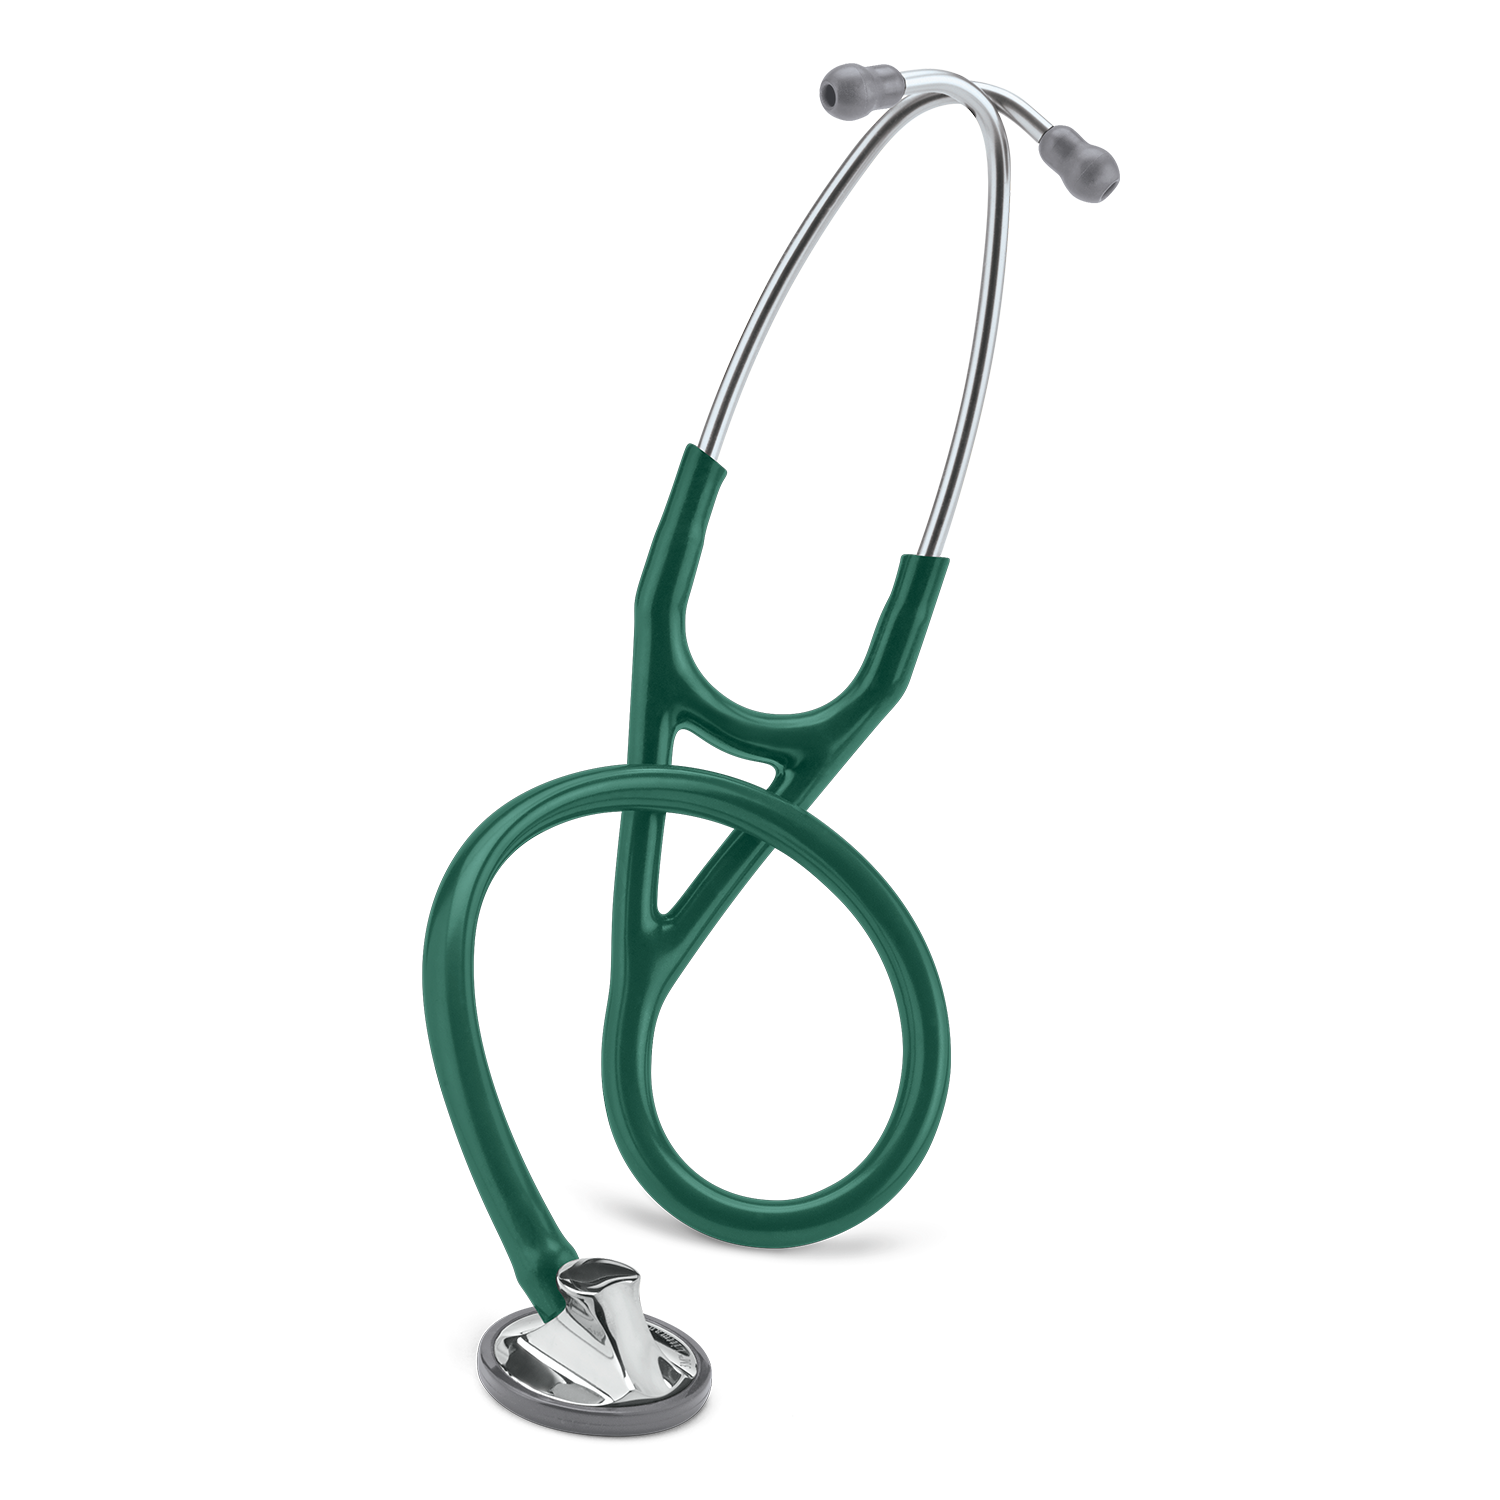 Finesse 2 Pressure Cardiology Stethoscope | Green